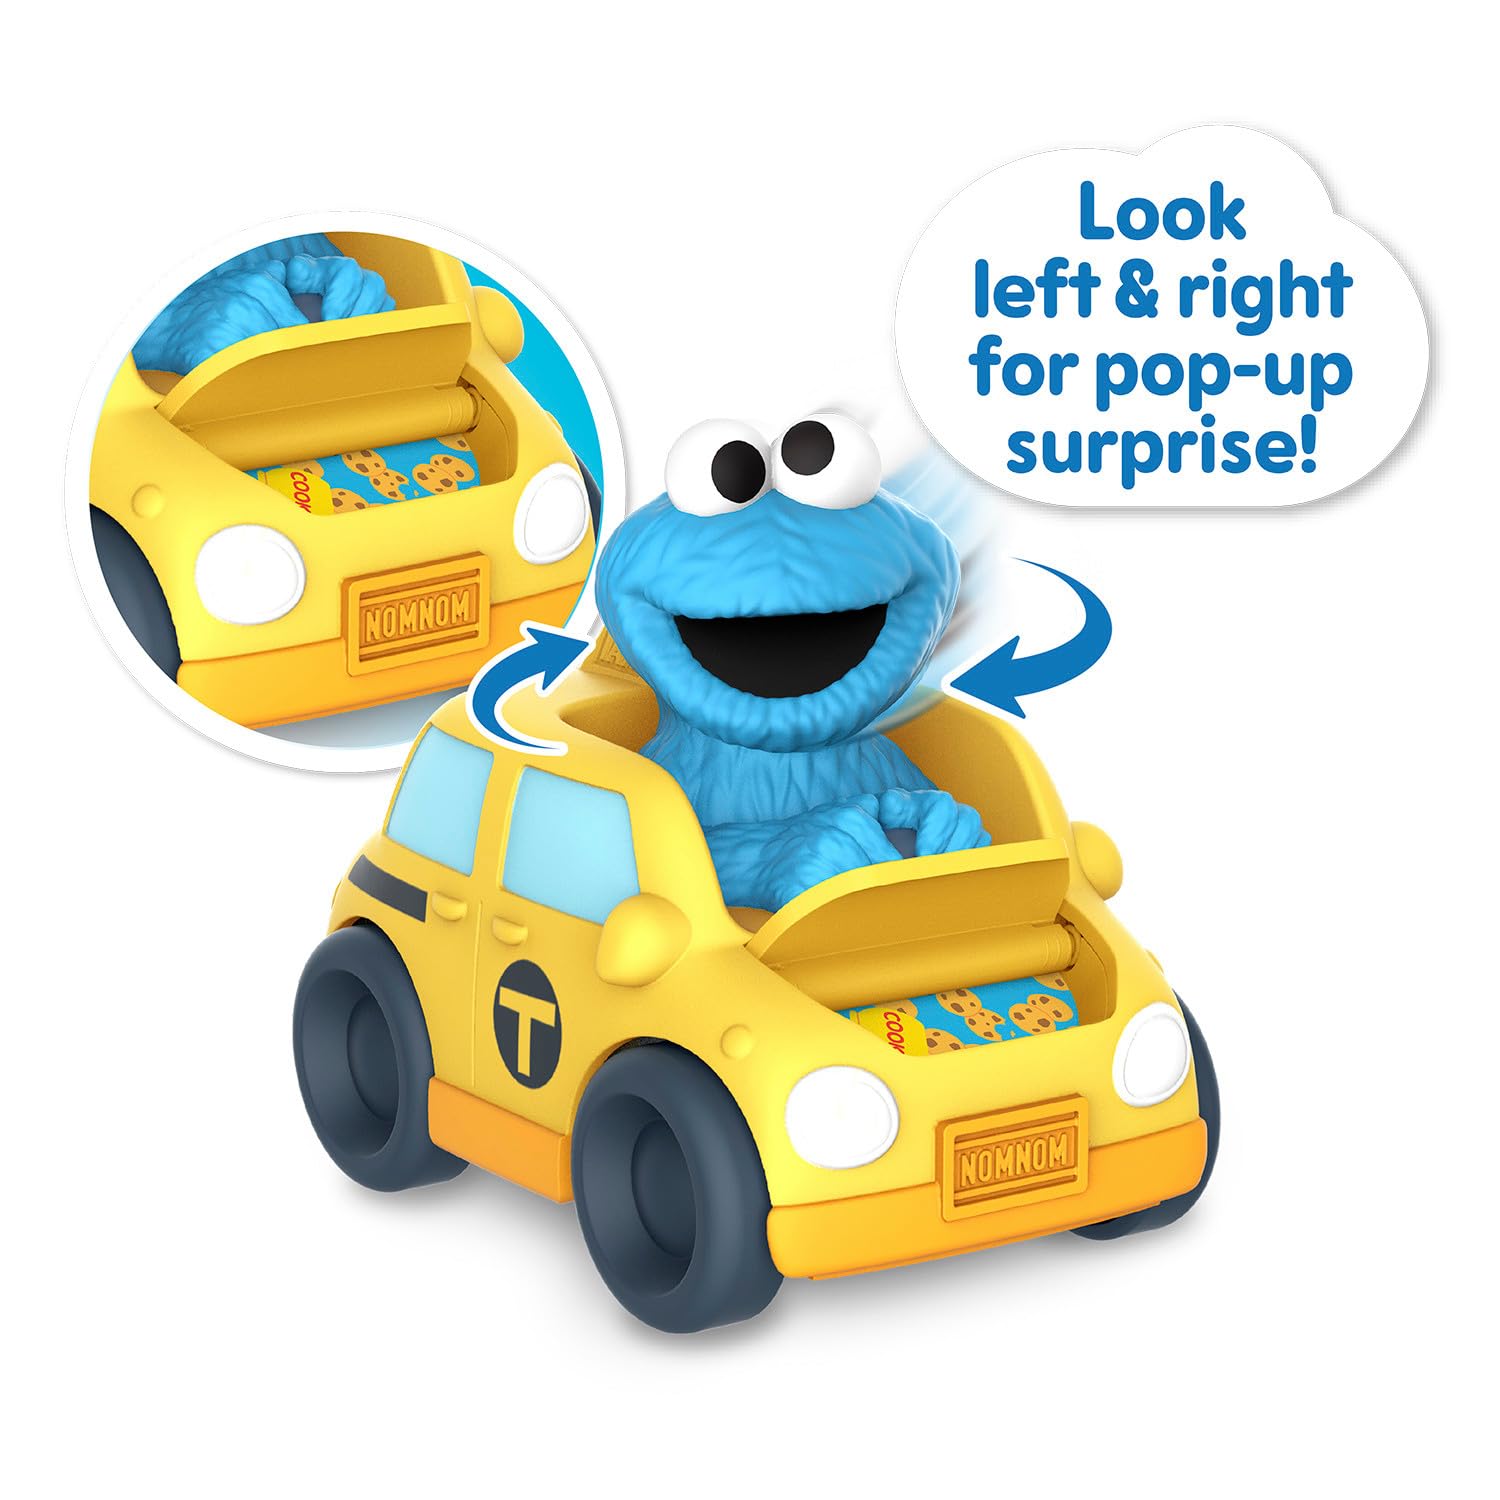 Sesame Street Twist and Pop Wheelies 3-Pack Preschool Toy Vehicles, Officially Licensed Kids Toys for Ages 2 Up, Gifts and Presents, Amazon Exclusive